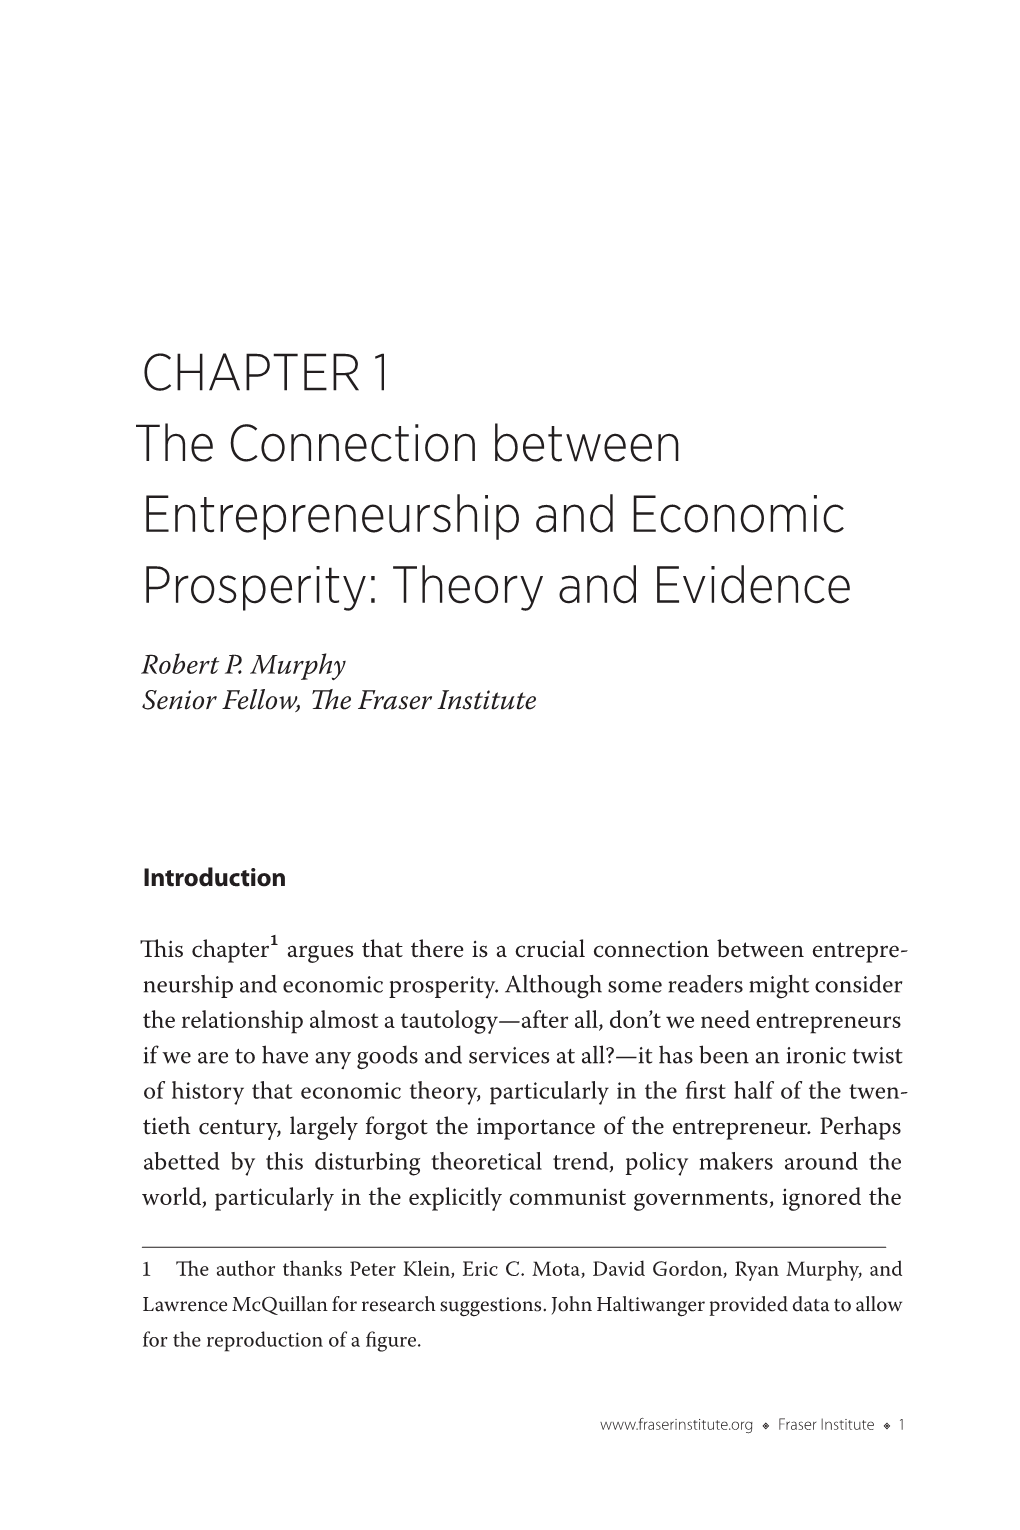 CHAPTER 1 the Connection Between Entrepreneurship and Economic Prosperity: Theory and Evidence